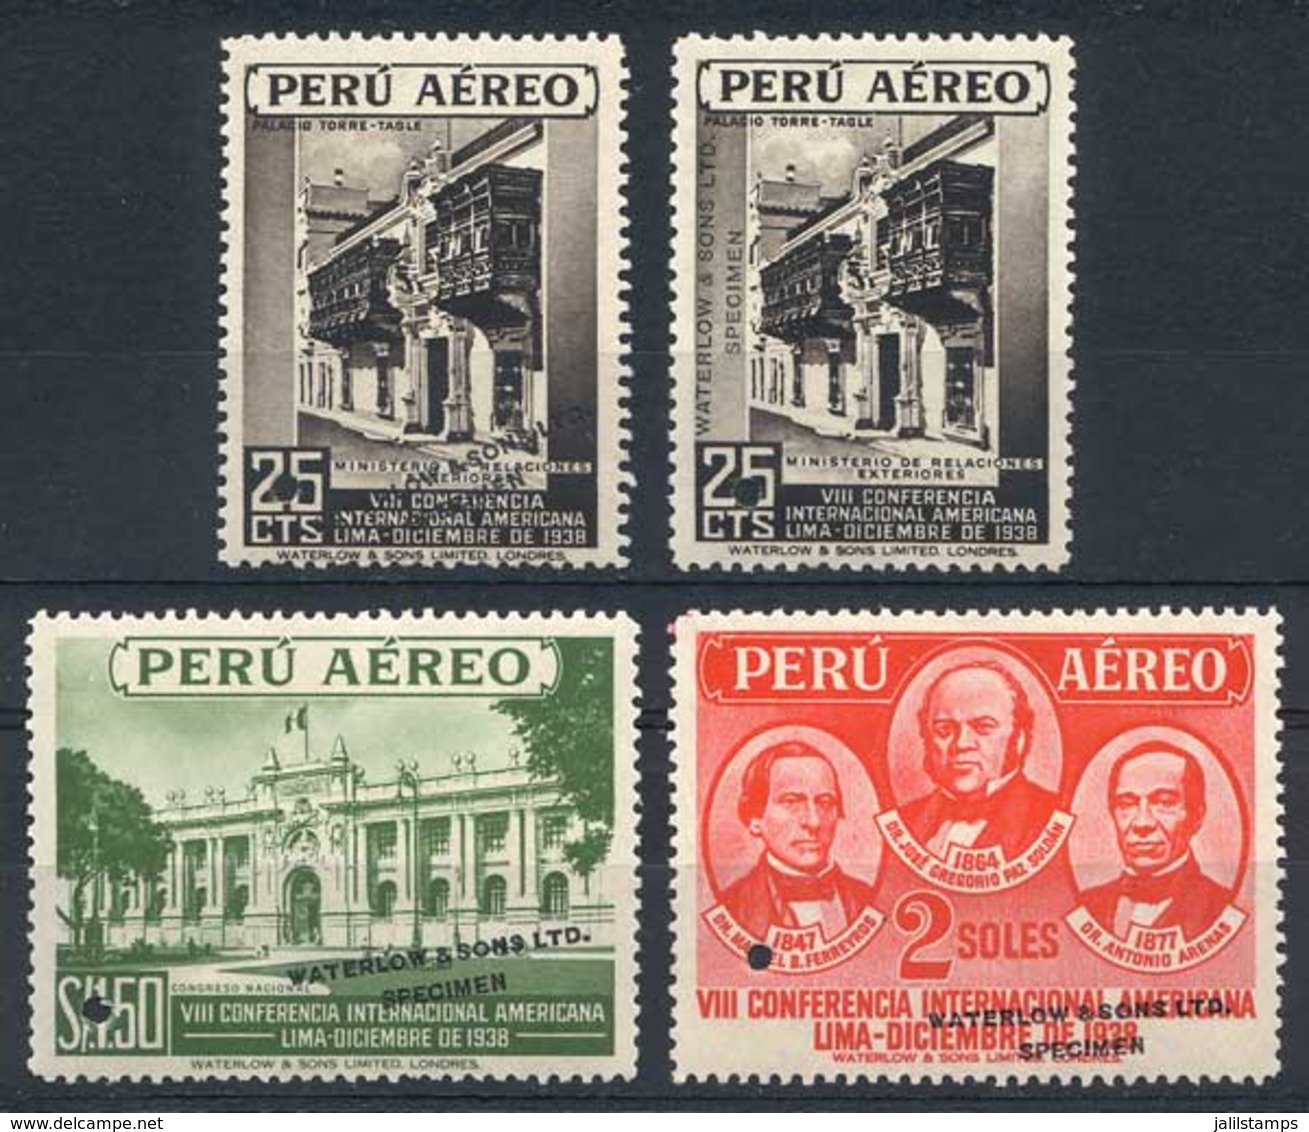 PERU: Yvert 62/64, 1938 Panamerican Congress, 4 Stamps With Little Punch Cancel And Overprinted "WATERLOW & SONS LTD - S - Pérou